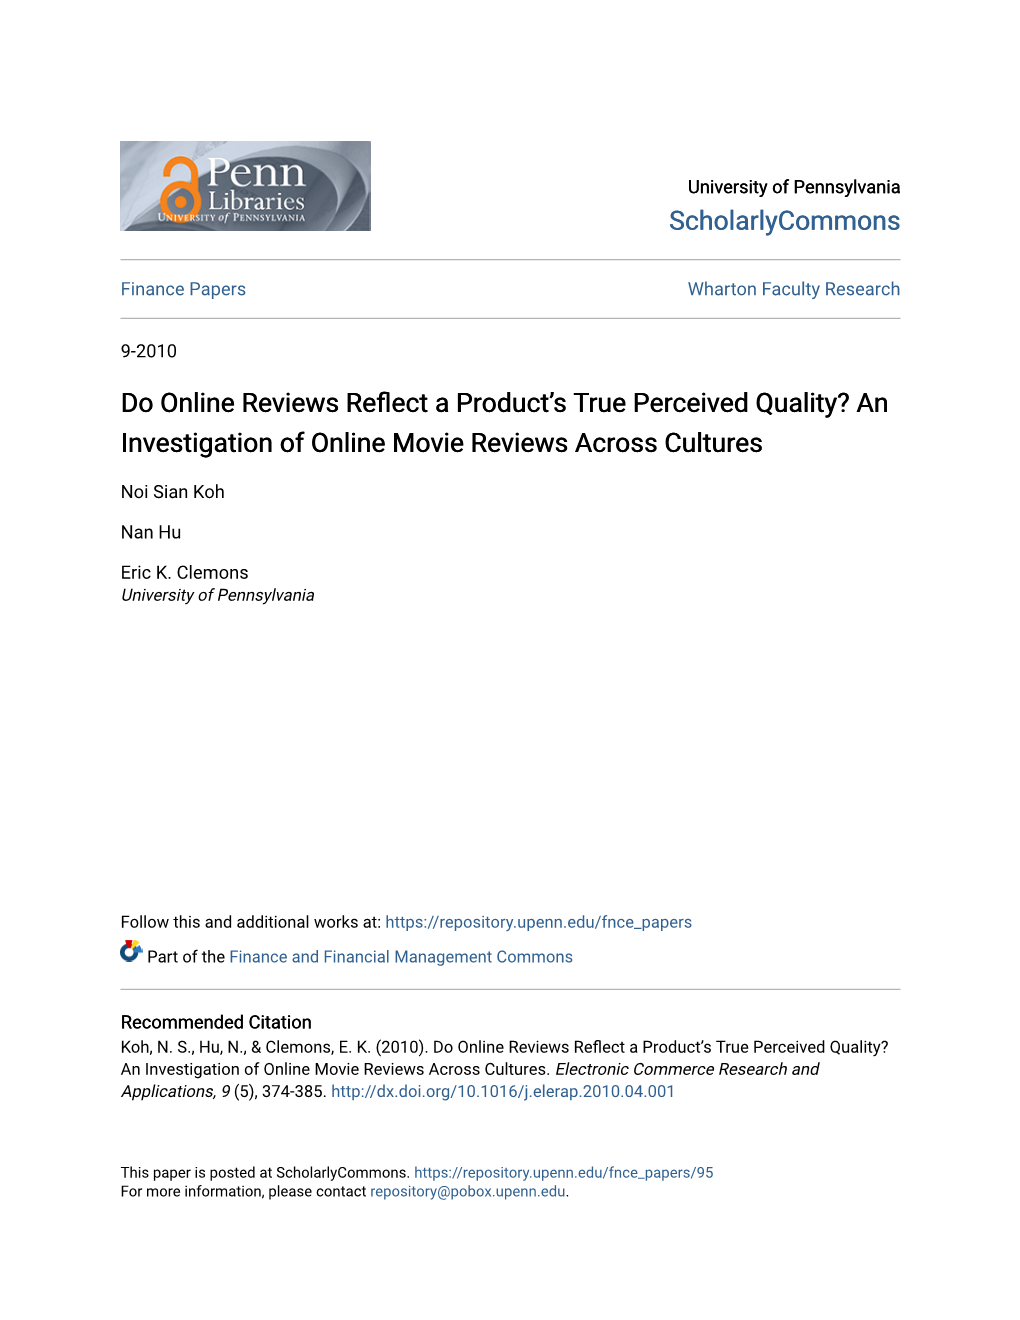 Do Online Reviews Reflect a Product's True